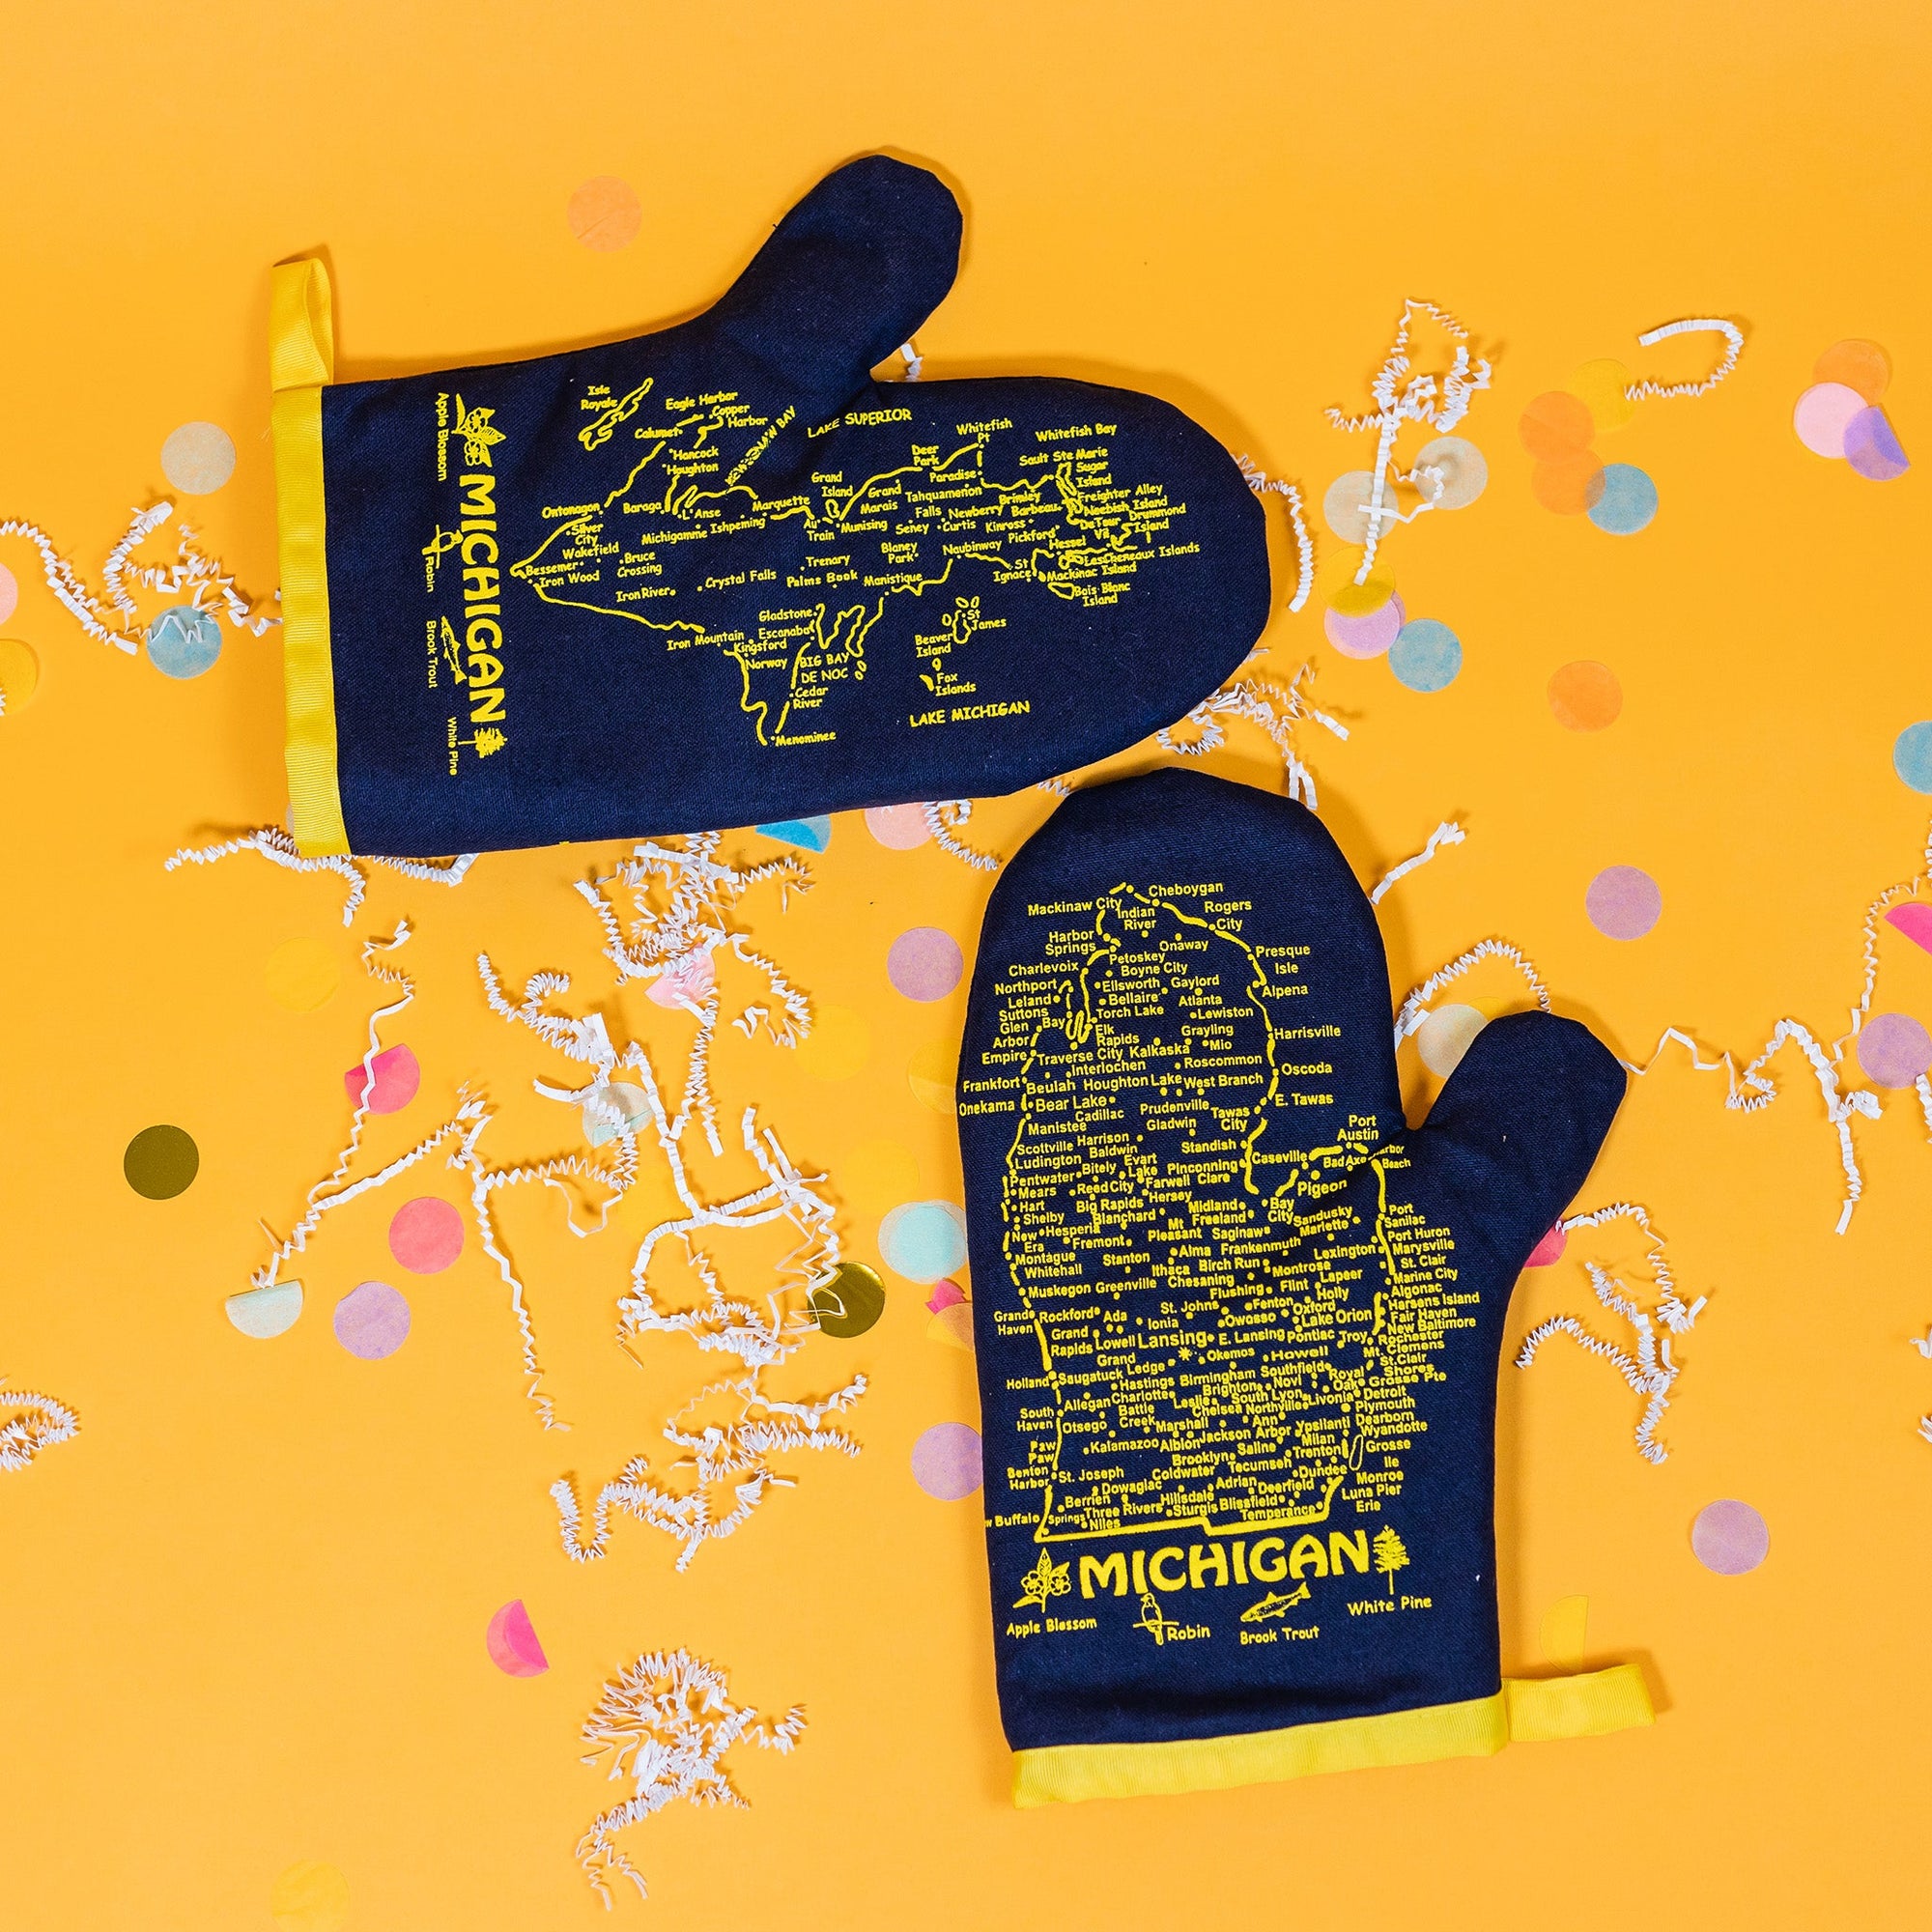 On a sunny mustard background sits a pair of oven mitts with white crinkle and big, colorful confetti scattered around. These navy and yellow oven mitts feature a yellow map of Michigan and the UP with cities in yellow.